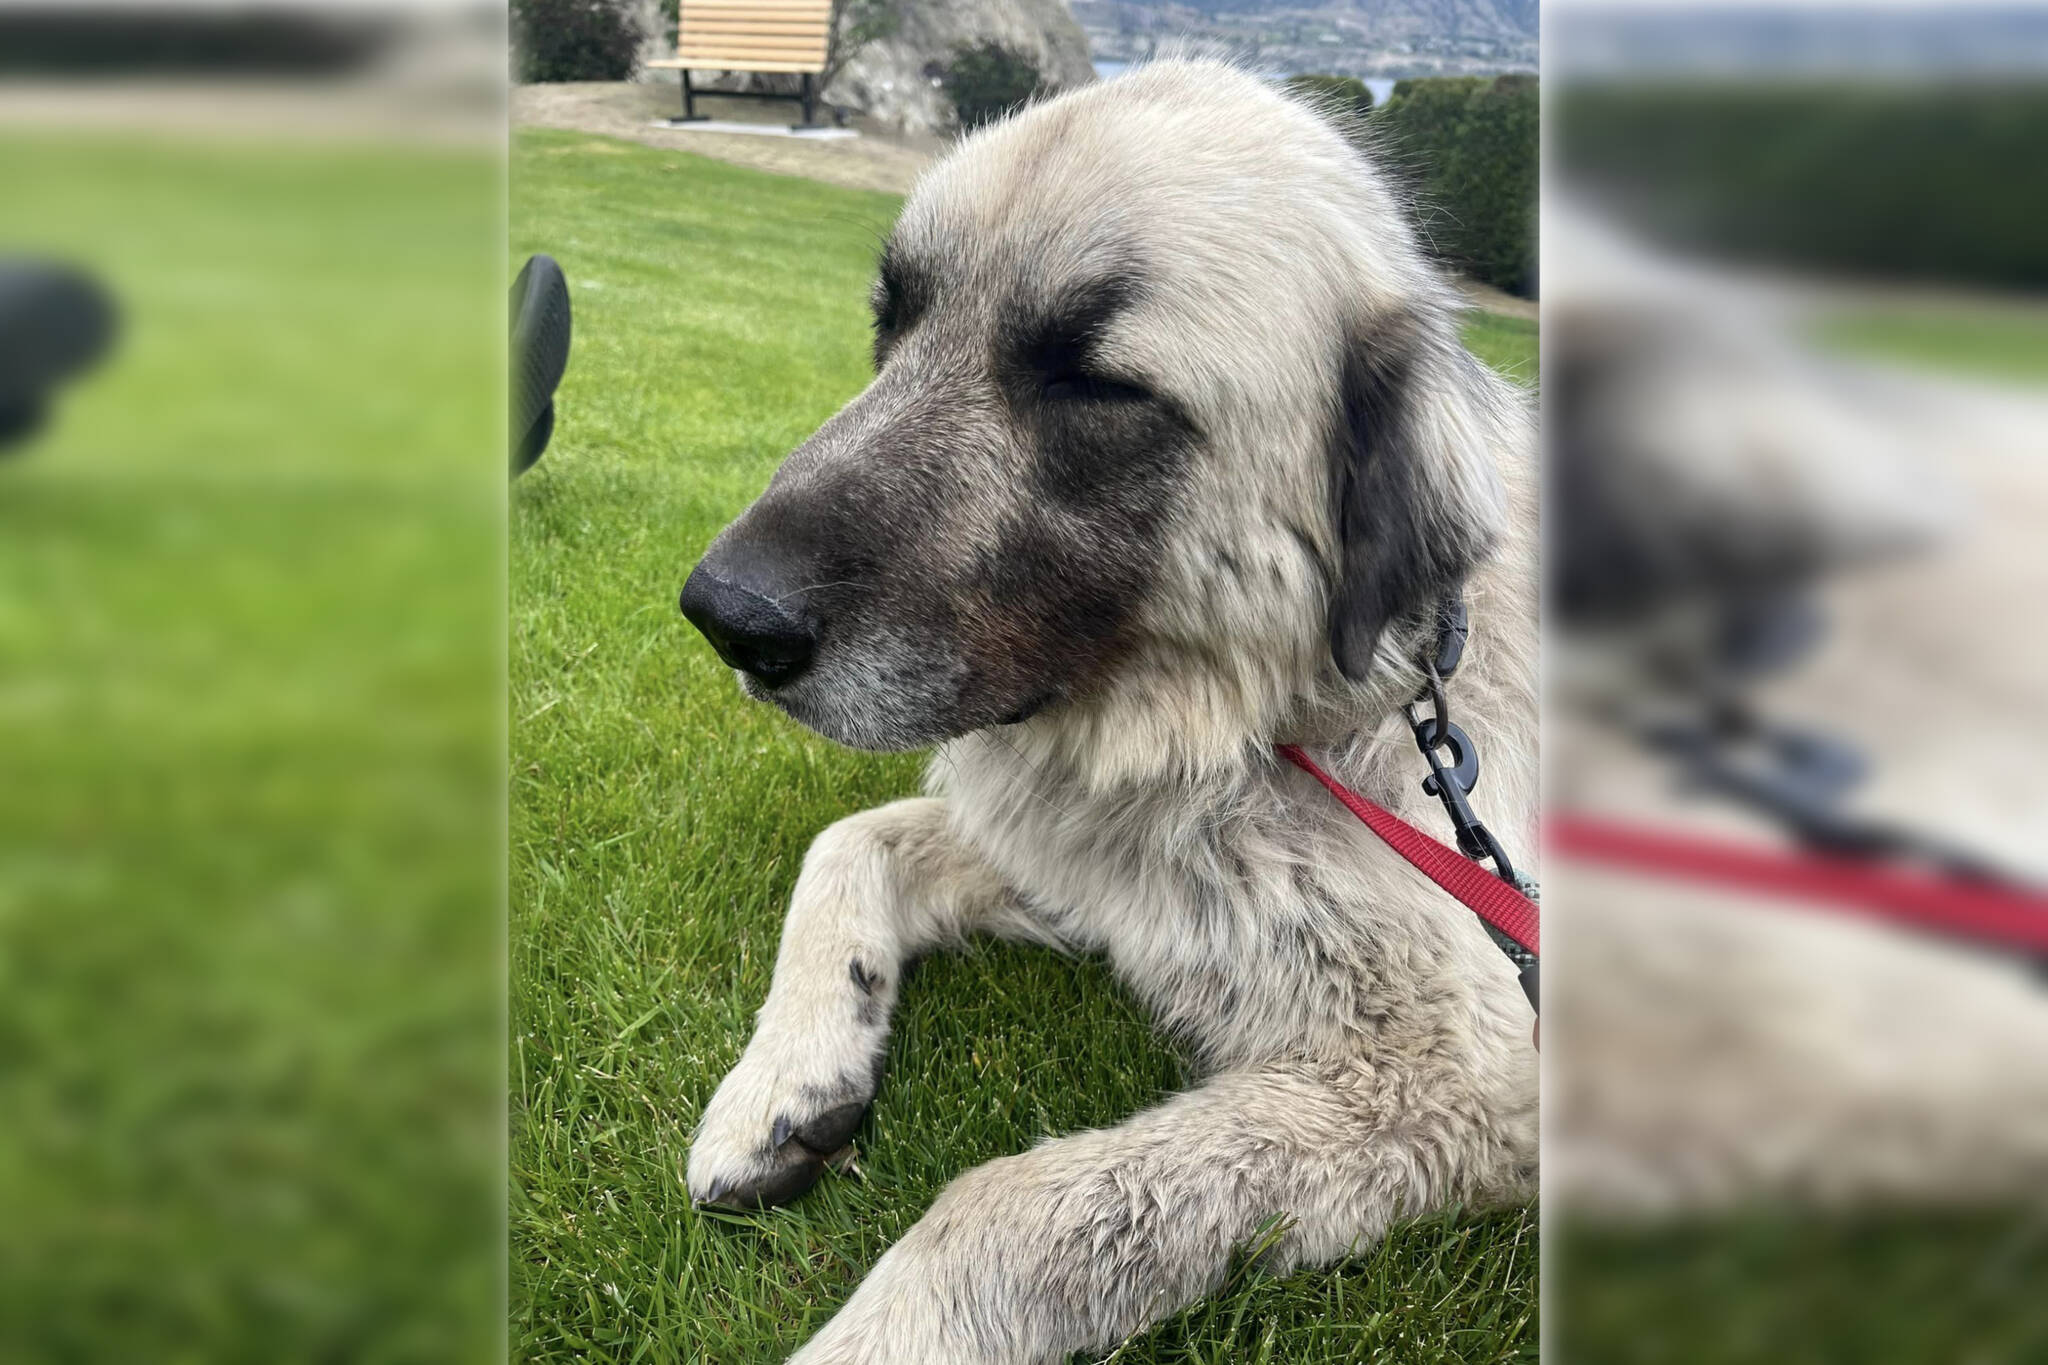 Barley, who was on the run for 10 days, was finally caught 100 kilometres from home in Penticton. He has now been returned to his owners. (Petra’s Pawdicures - Facebook)